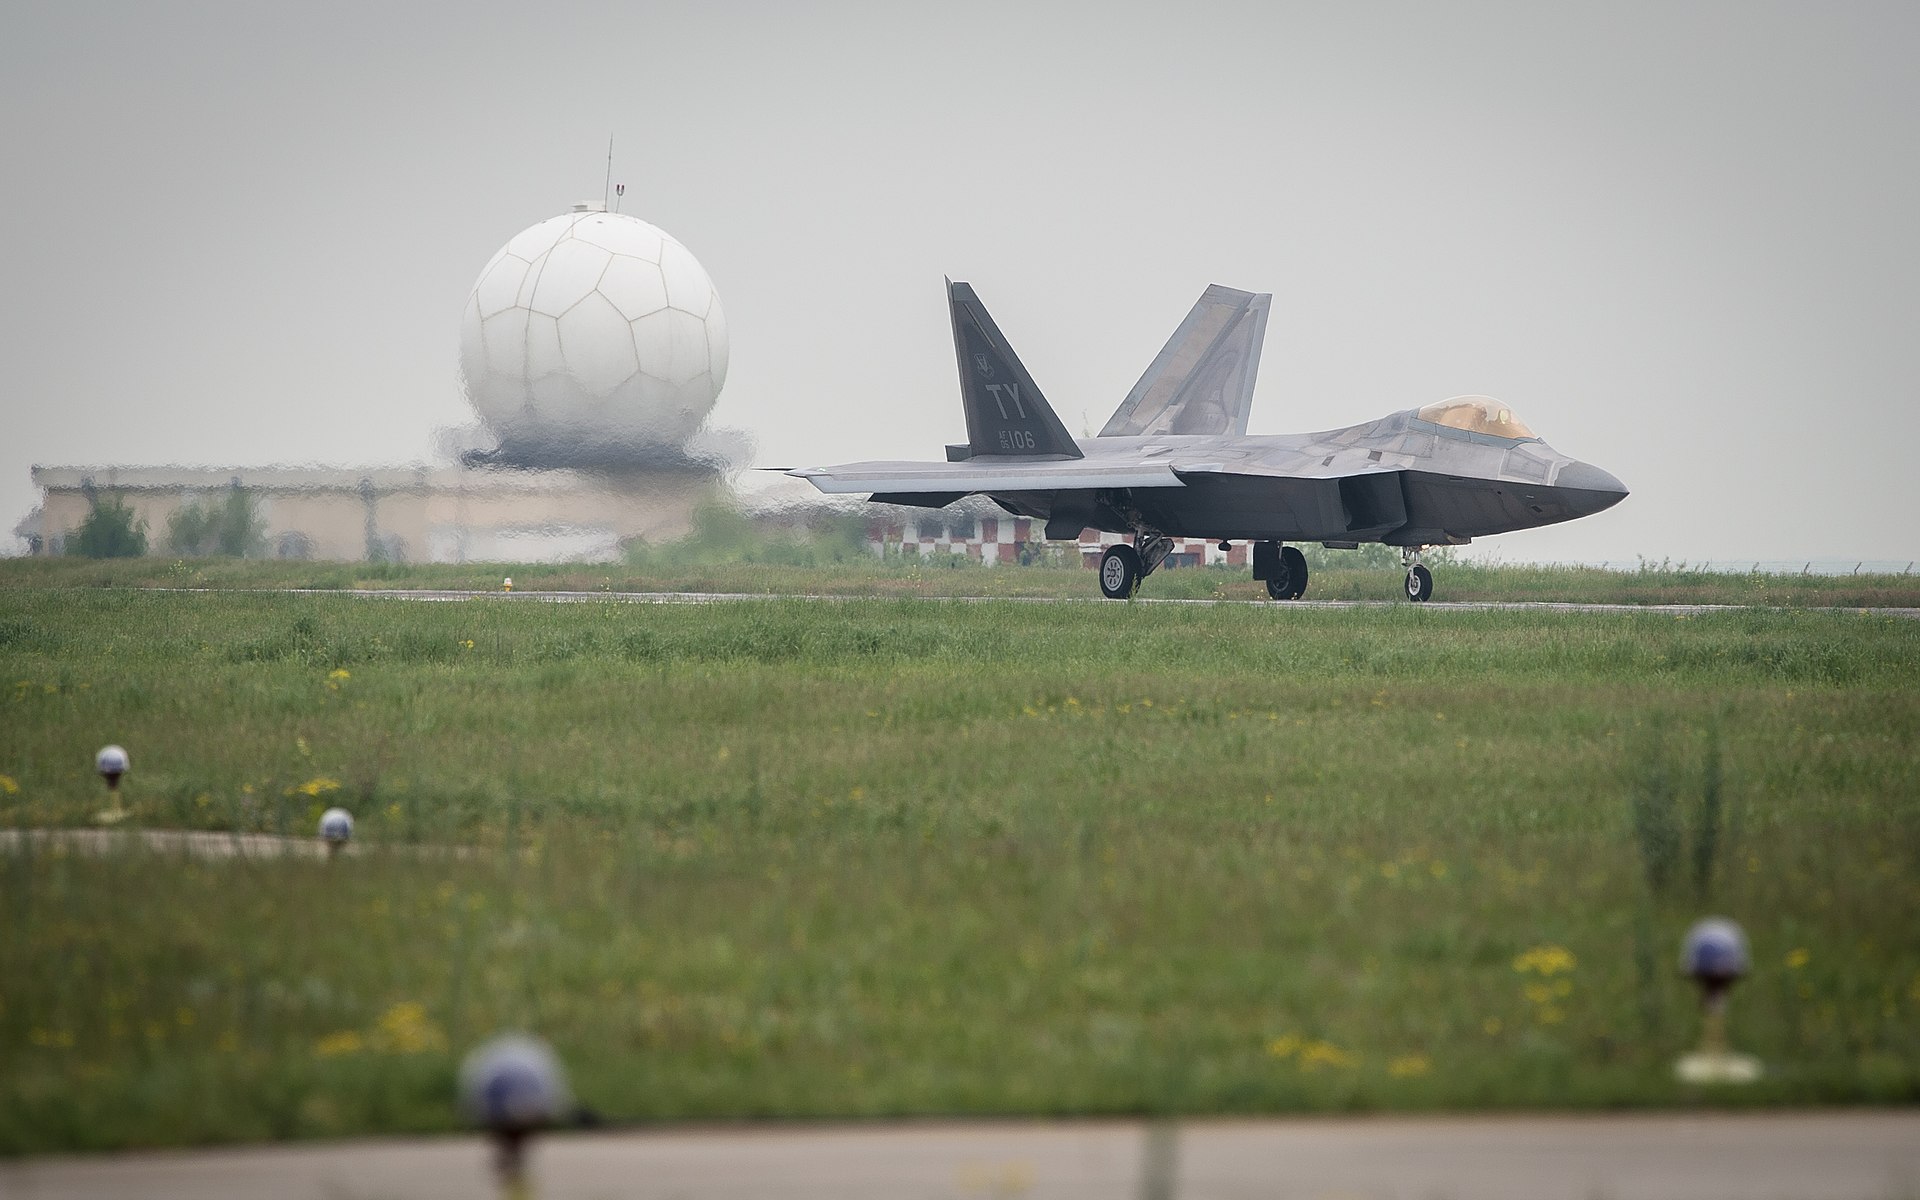 A gray F-22A Raptor jet plane taxis at Mihail Kogalniceanu Airport, with a globe-shaped radar station radome visible in the background.